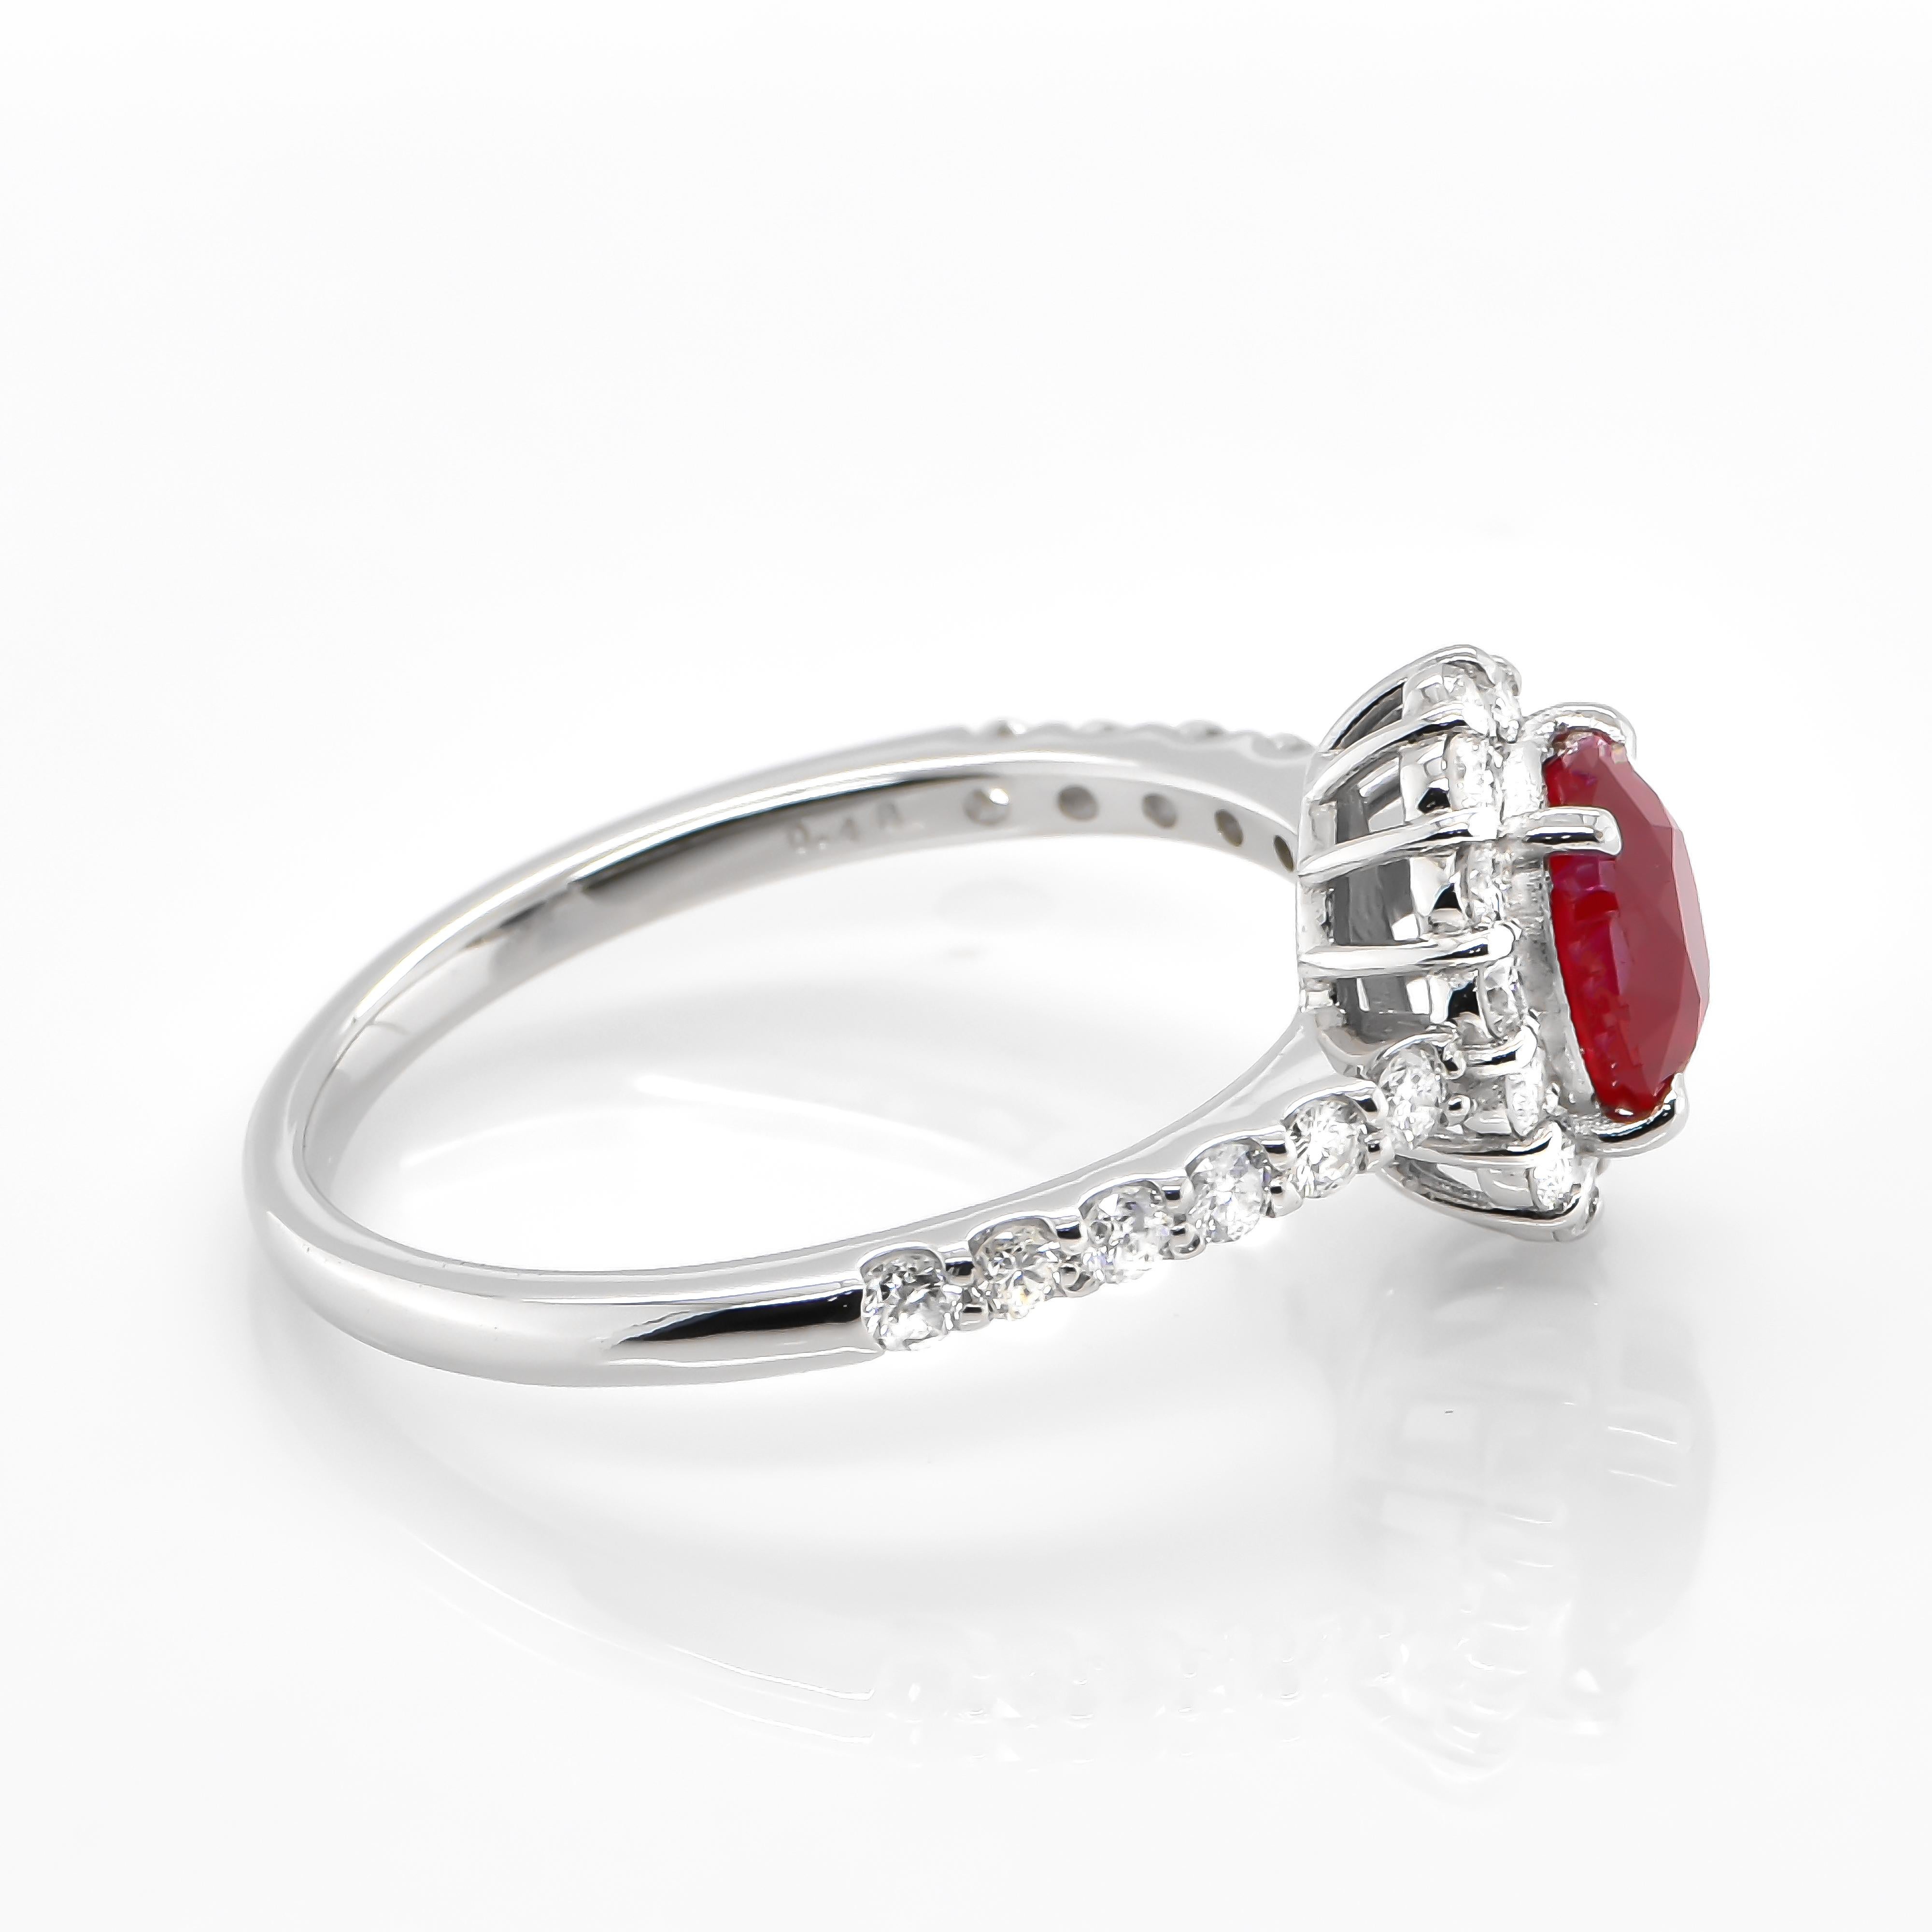 Oval Cut GIA Certified 1.16 Carat, No Heat, Blood Red, Burmese Ruby Ring Made in Platinum For Sale